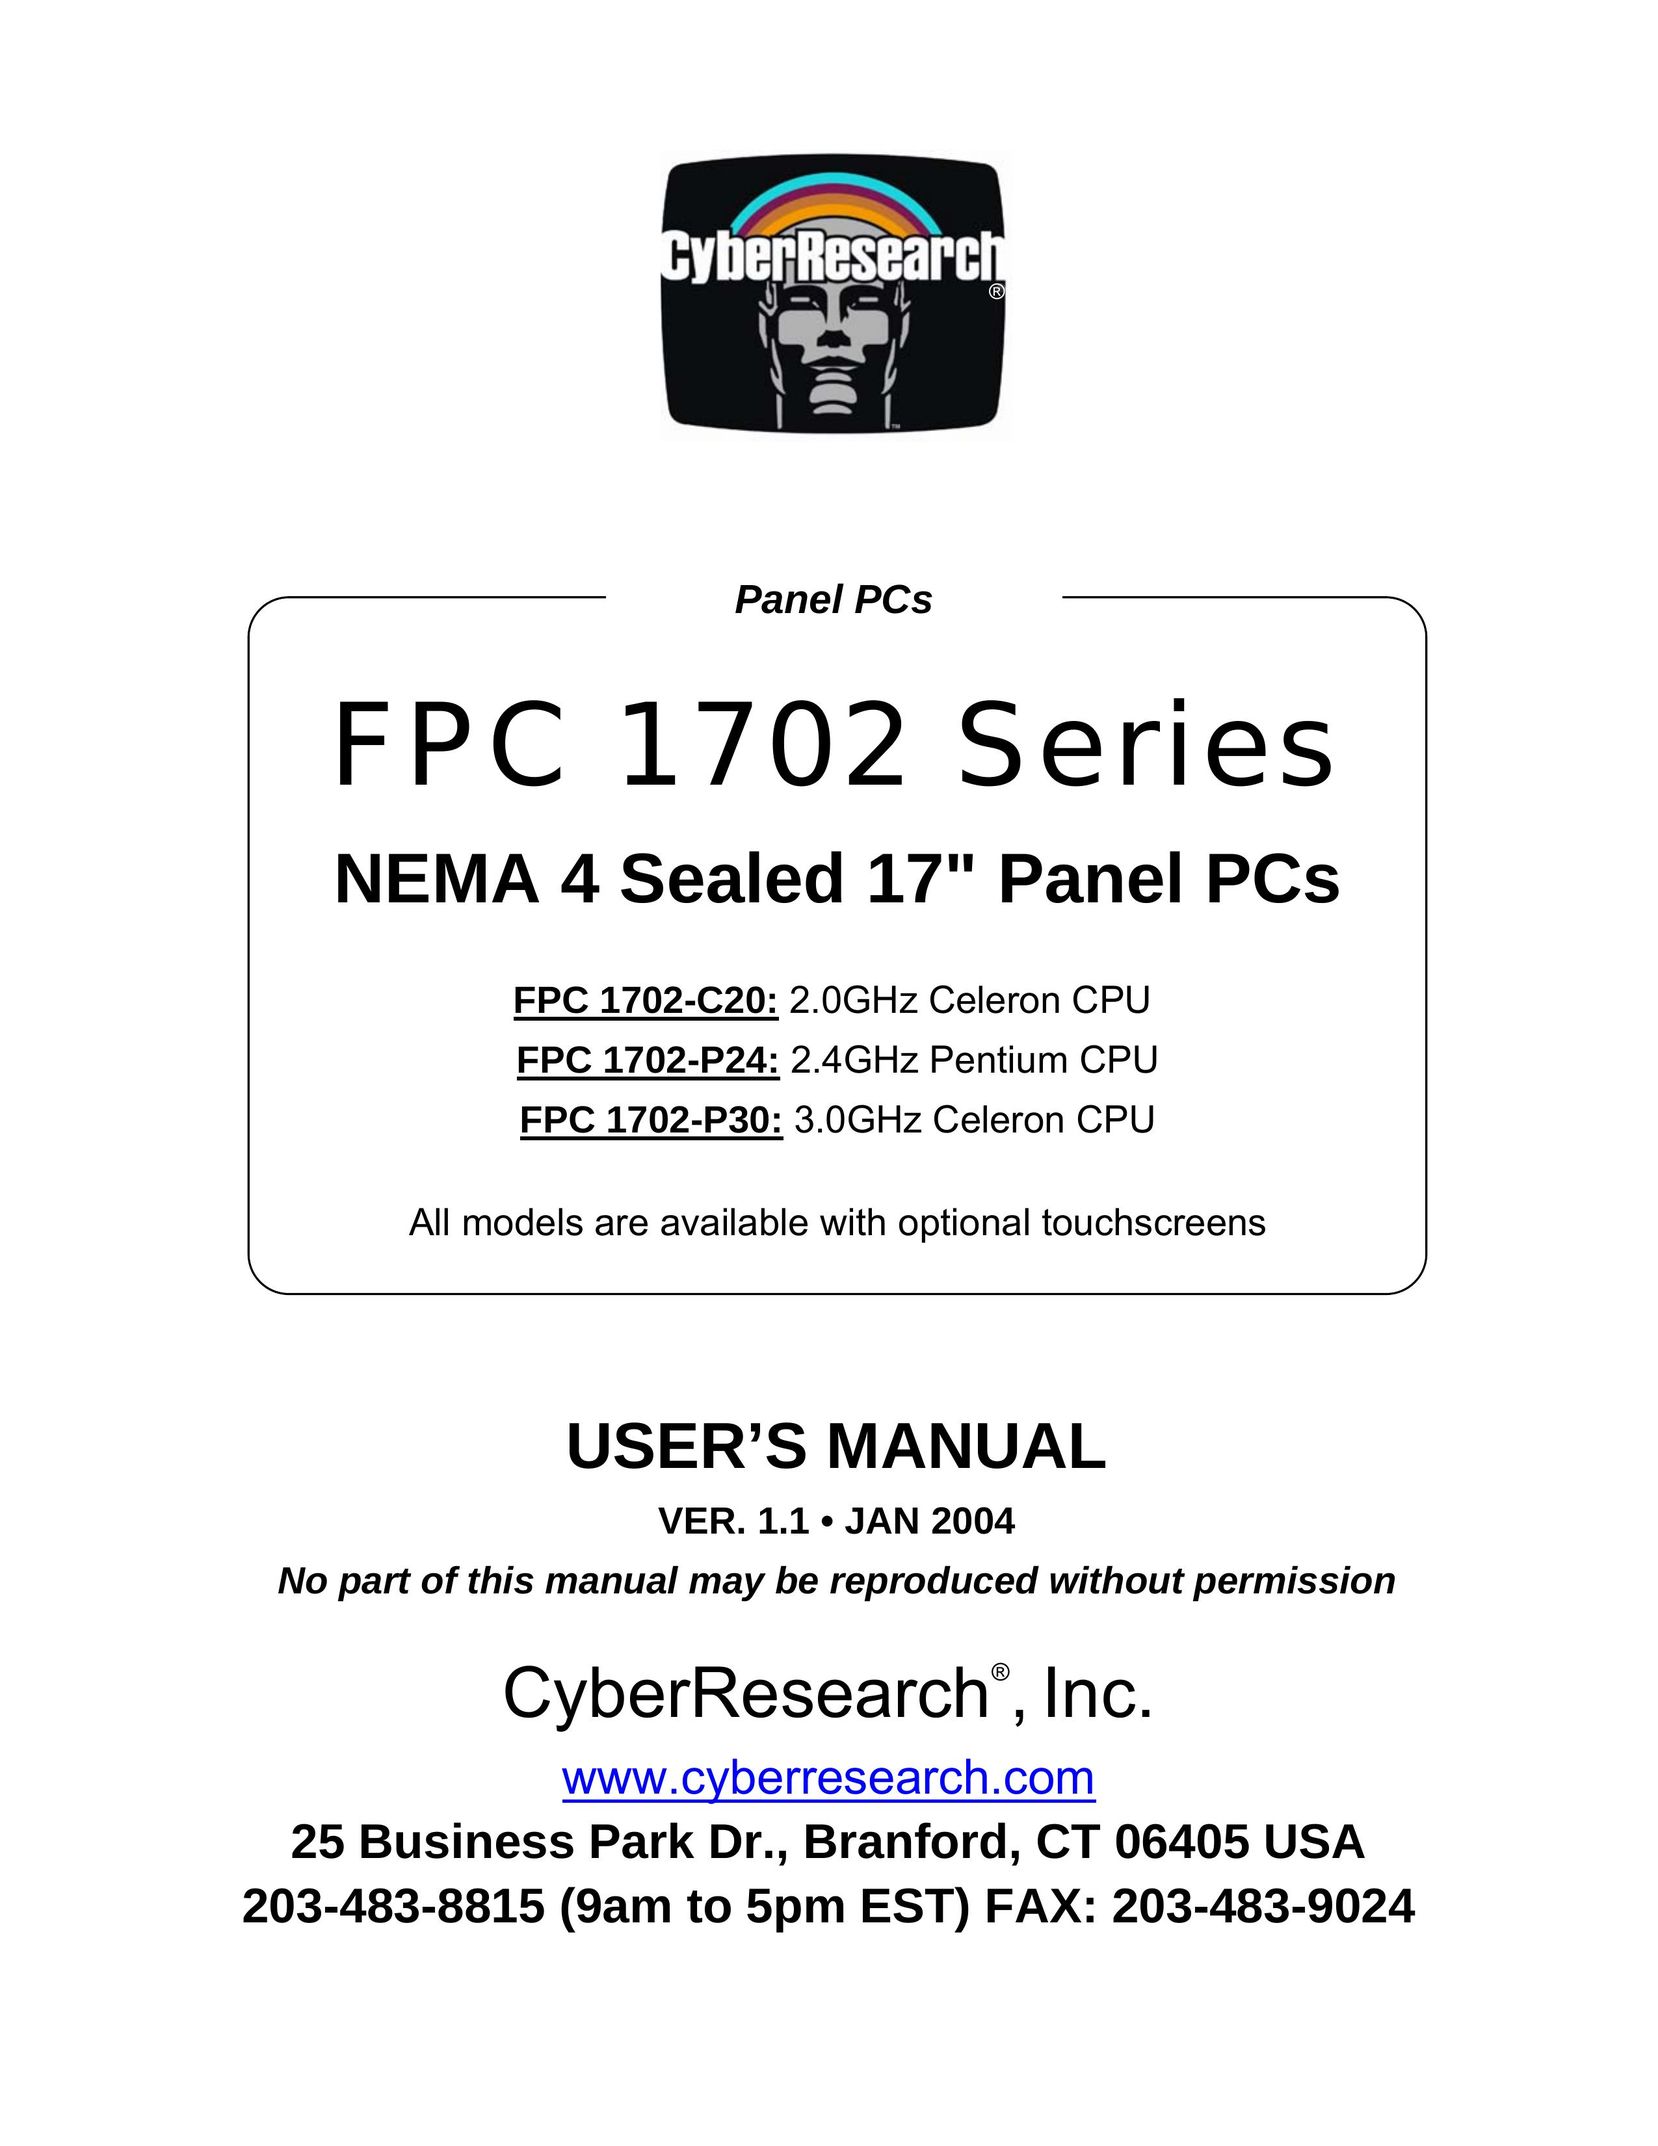 CyberResearch FPC 1702-P24 Personal Computer User Manual